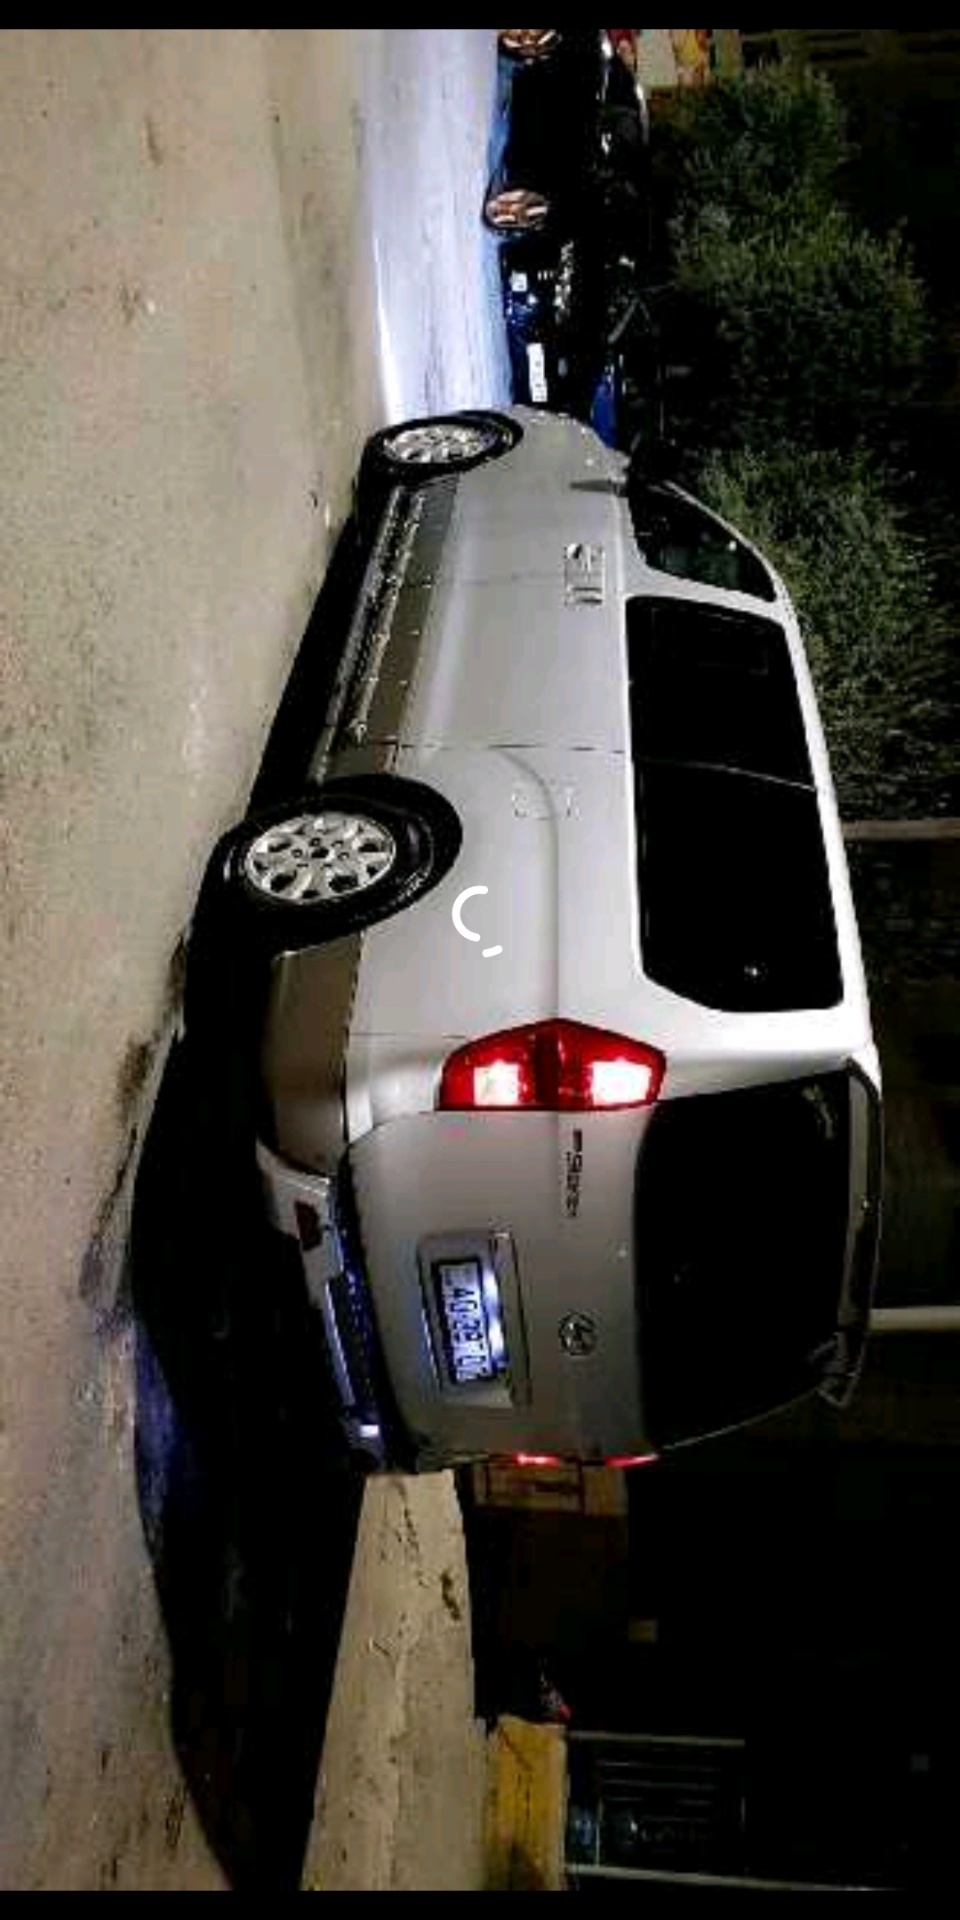 I want to sell my very neatly Used Lexus LX 570 2019 for just $30,000 USD. The car is absolutely fresh and ready to be used, nothing to worry about it is in per-  باص هونداي ستاركس ليمتد...